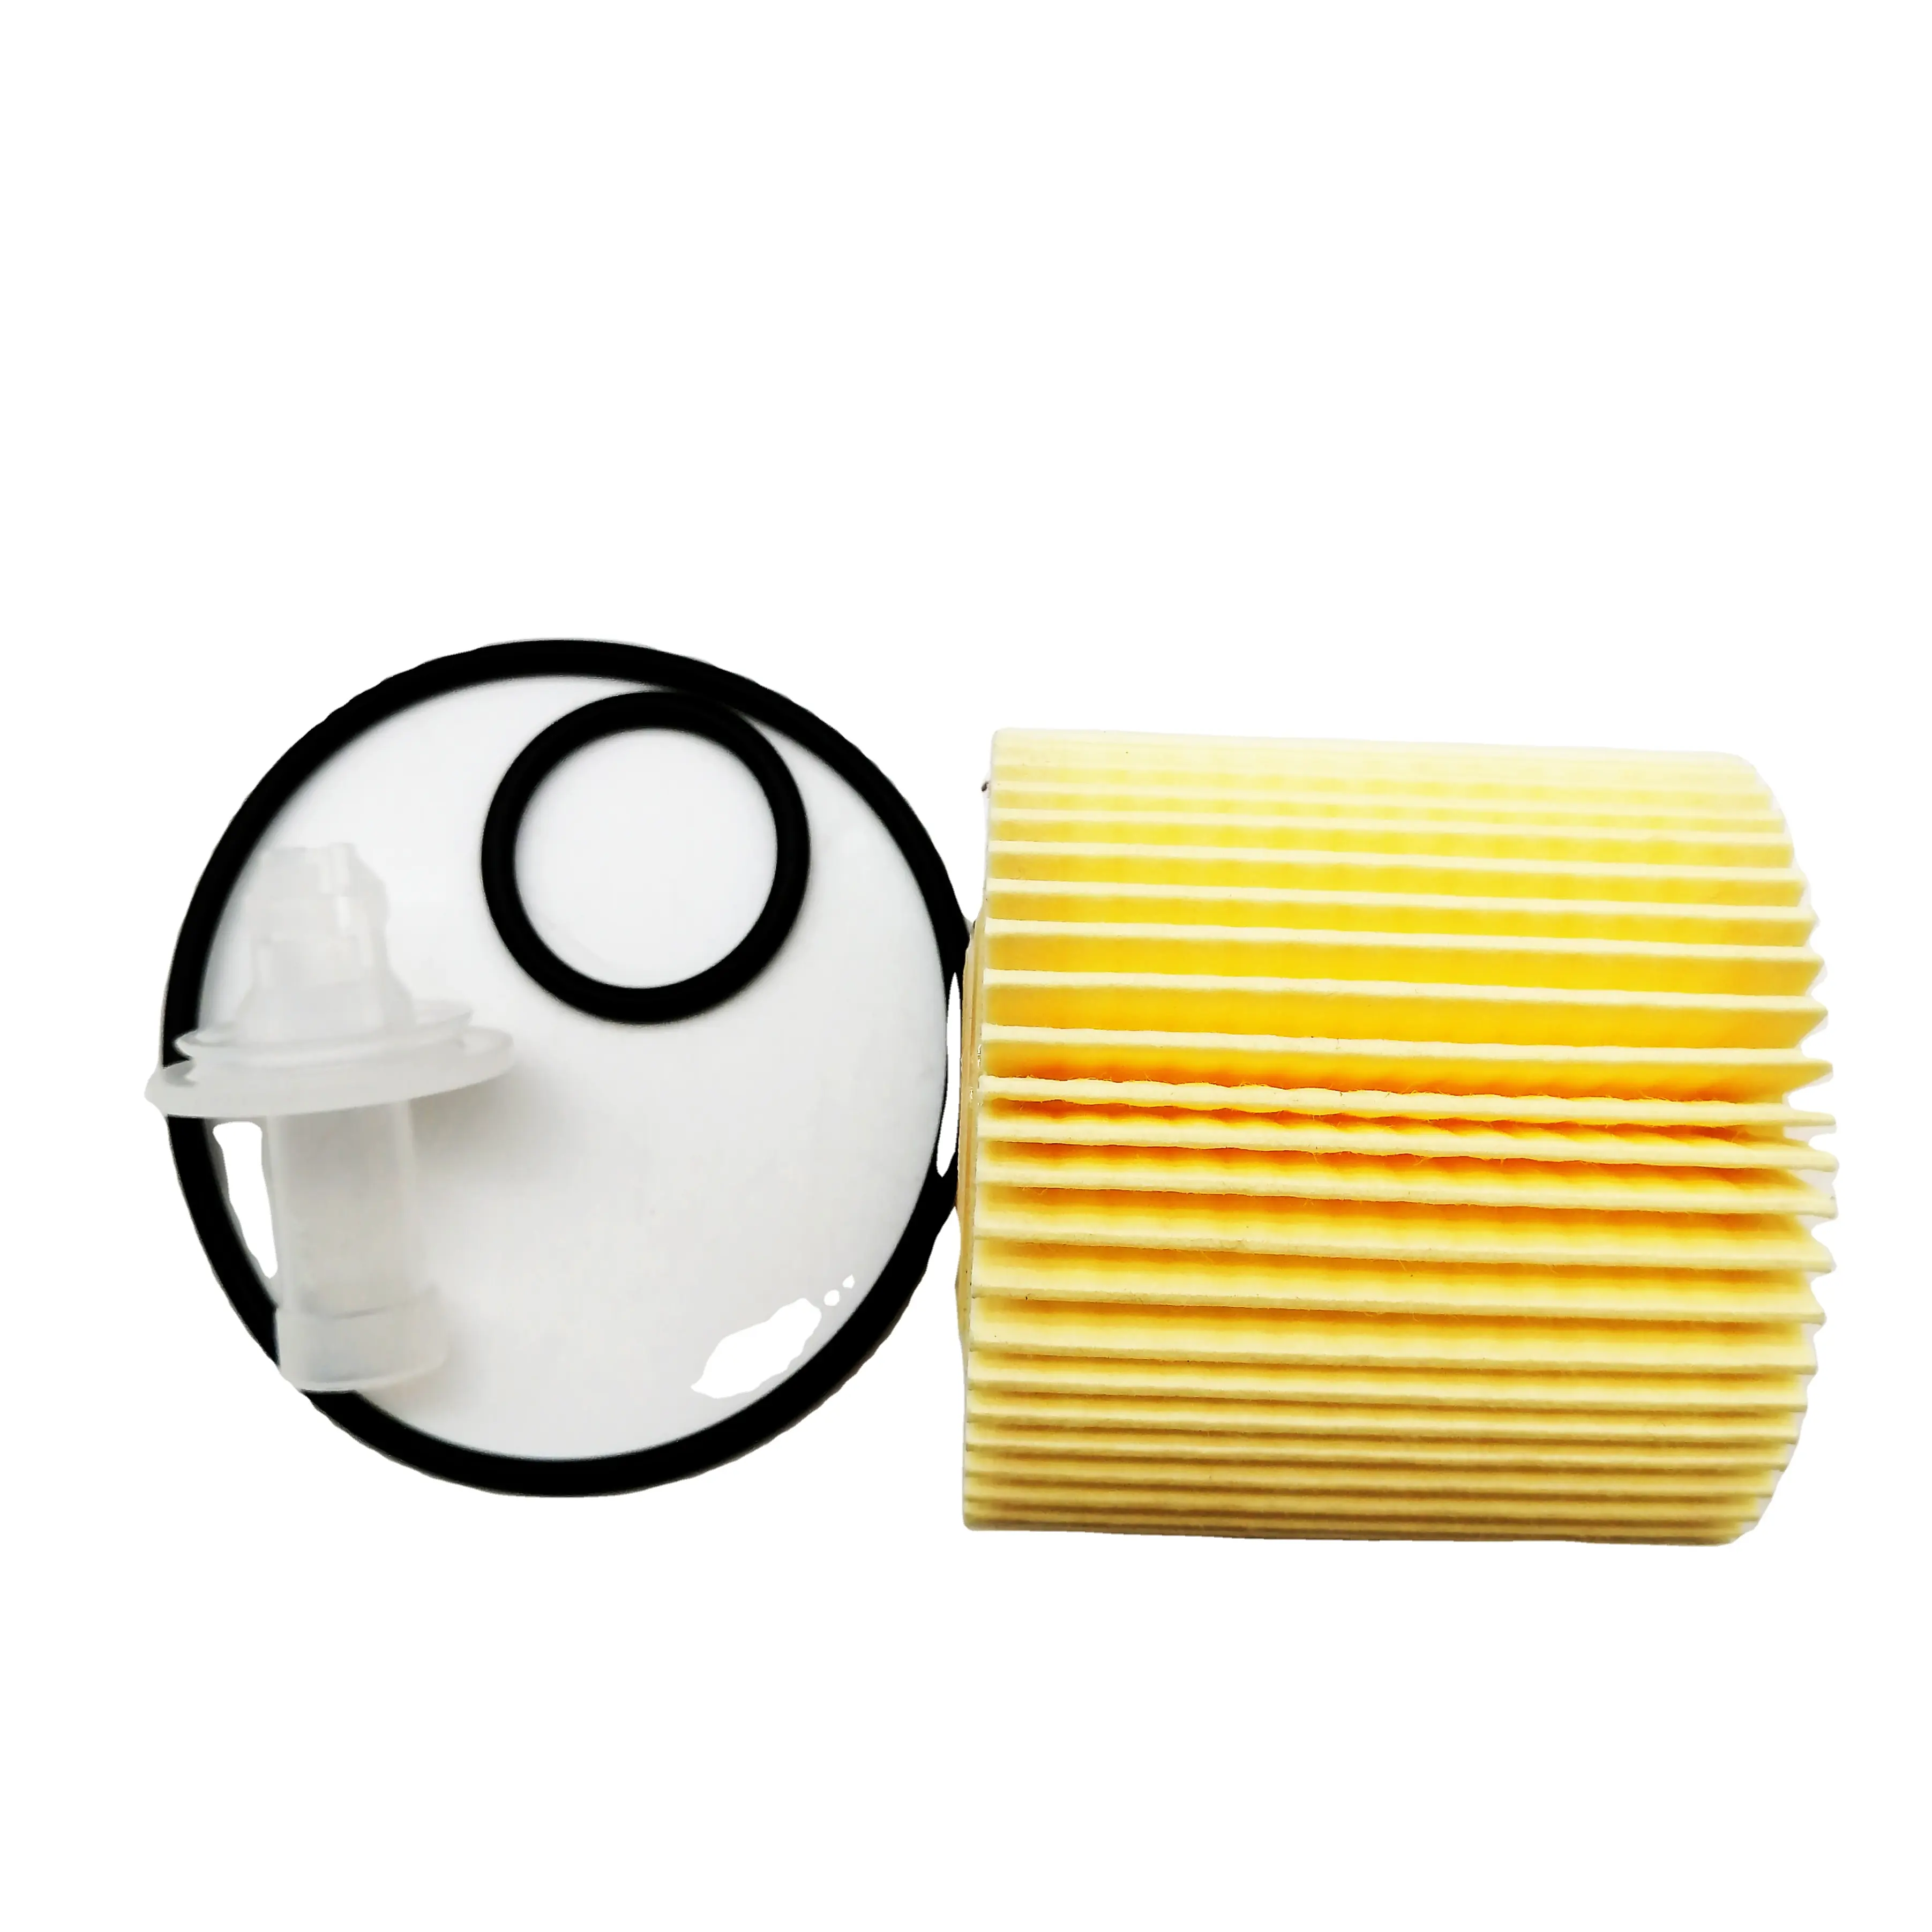 HYS High Performanceauto spare parts Oil Filter 04152-YZZA1 For Japan Cars